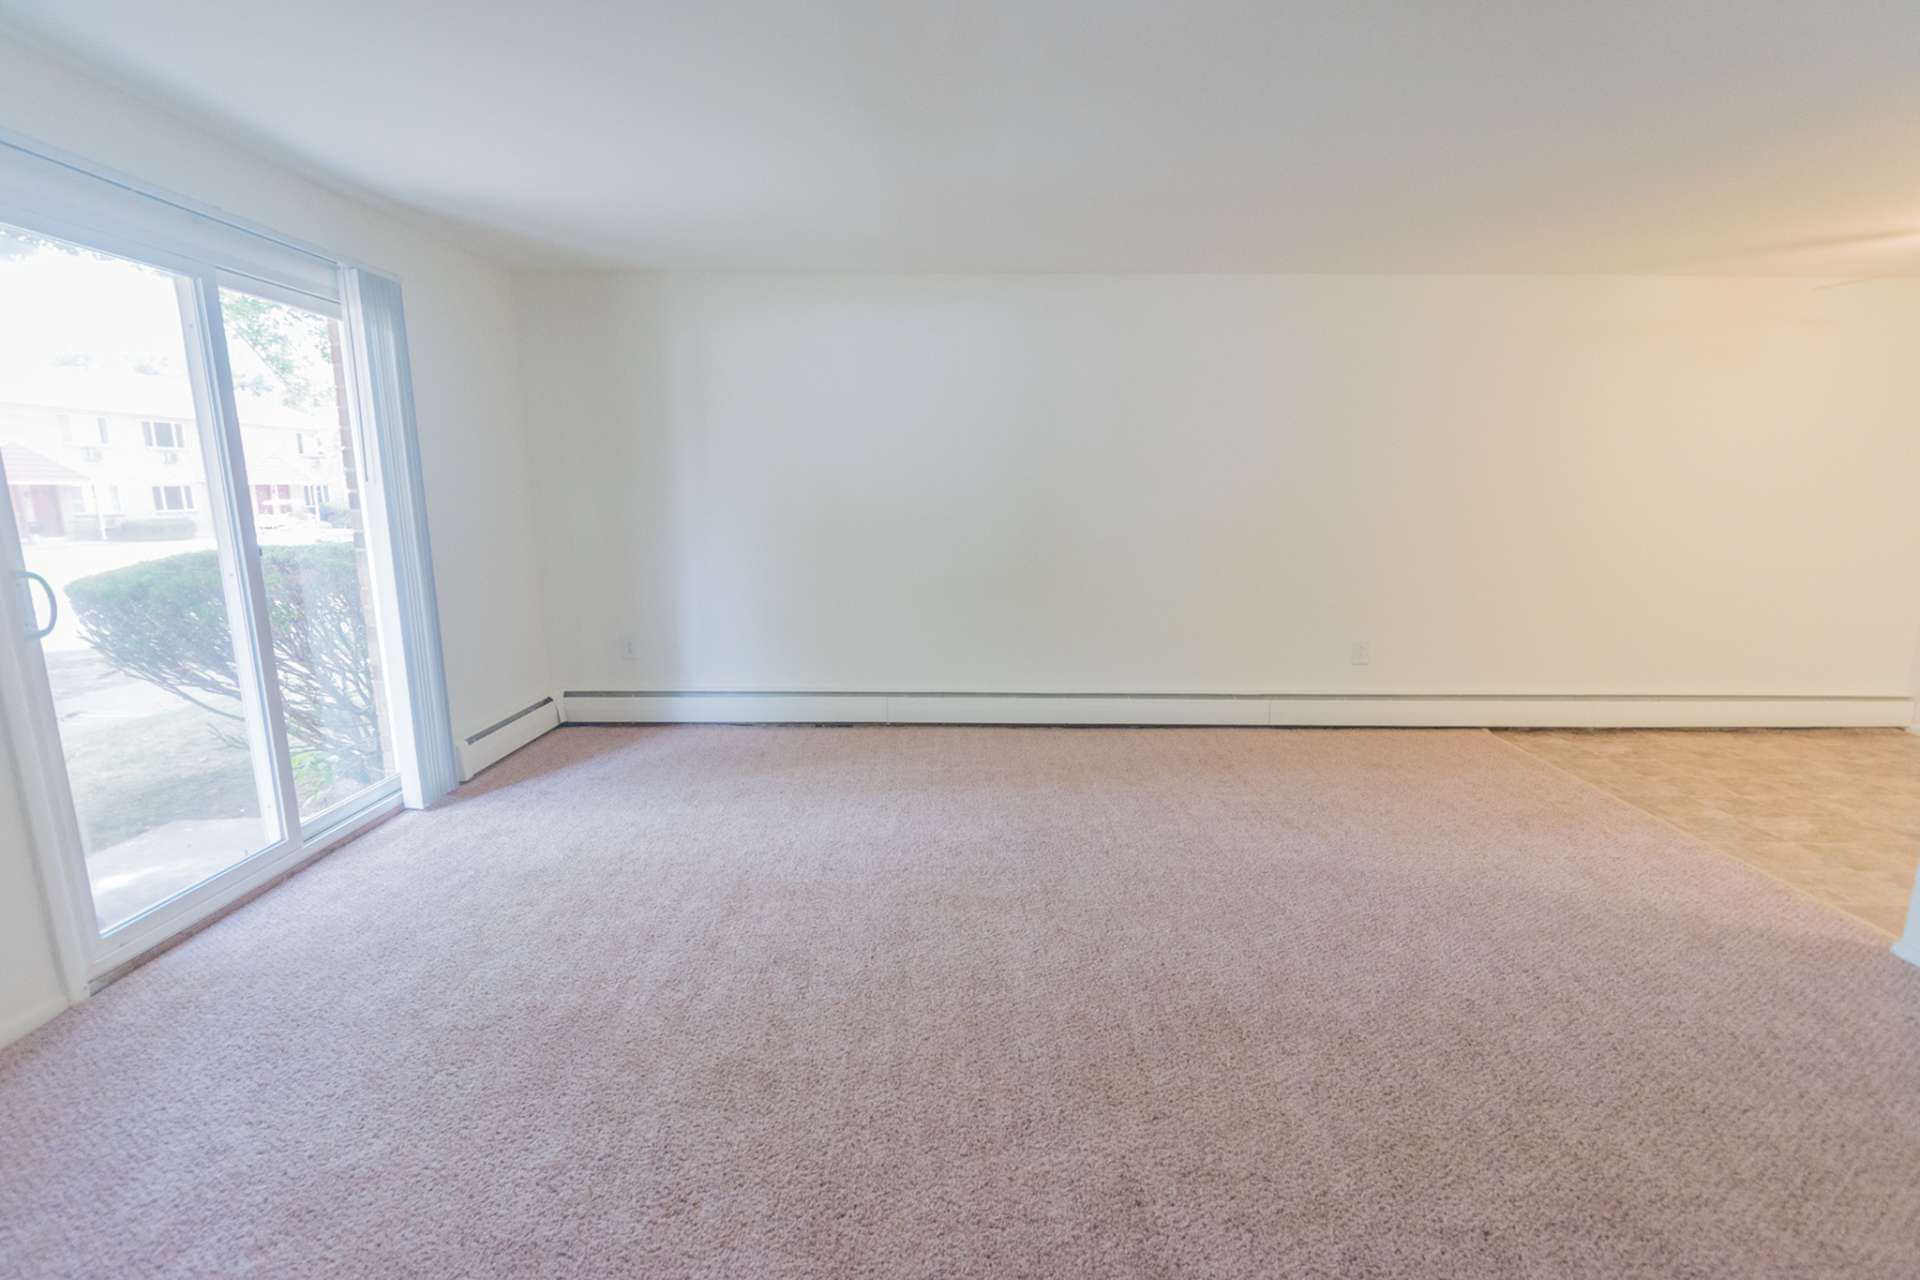 Spacious carpeted living room with sliding window doors.